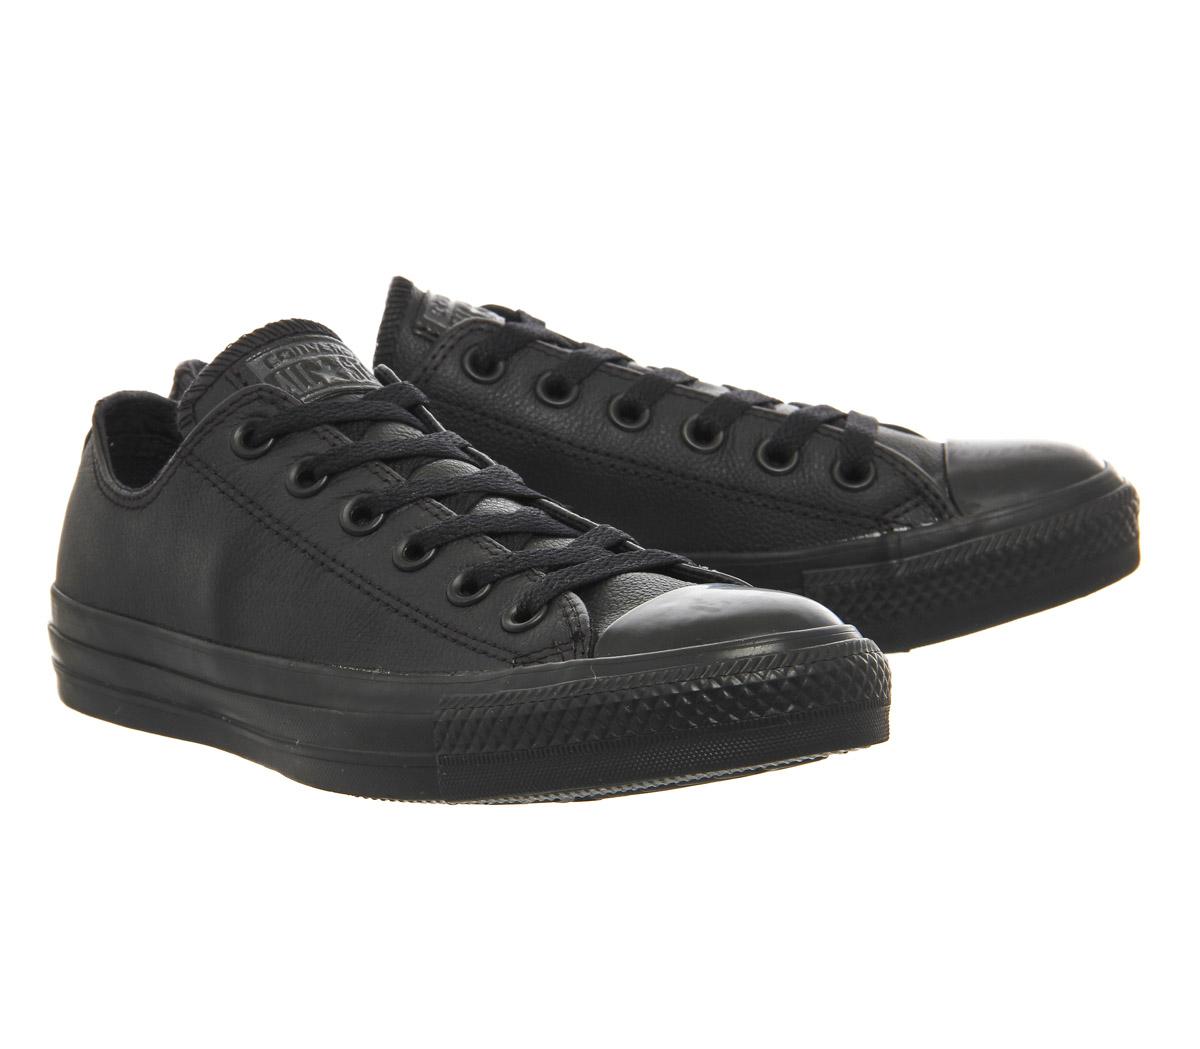 Converse All Star Low Leather in Black for Men - Lyst